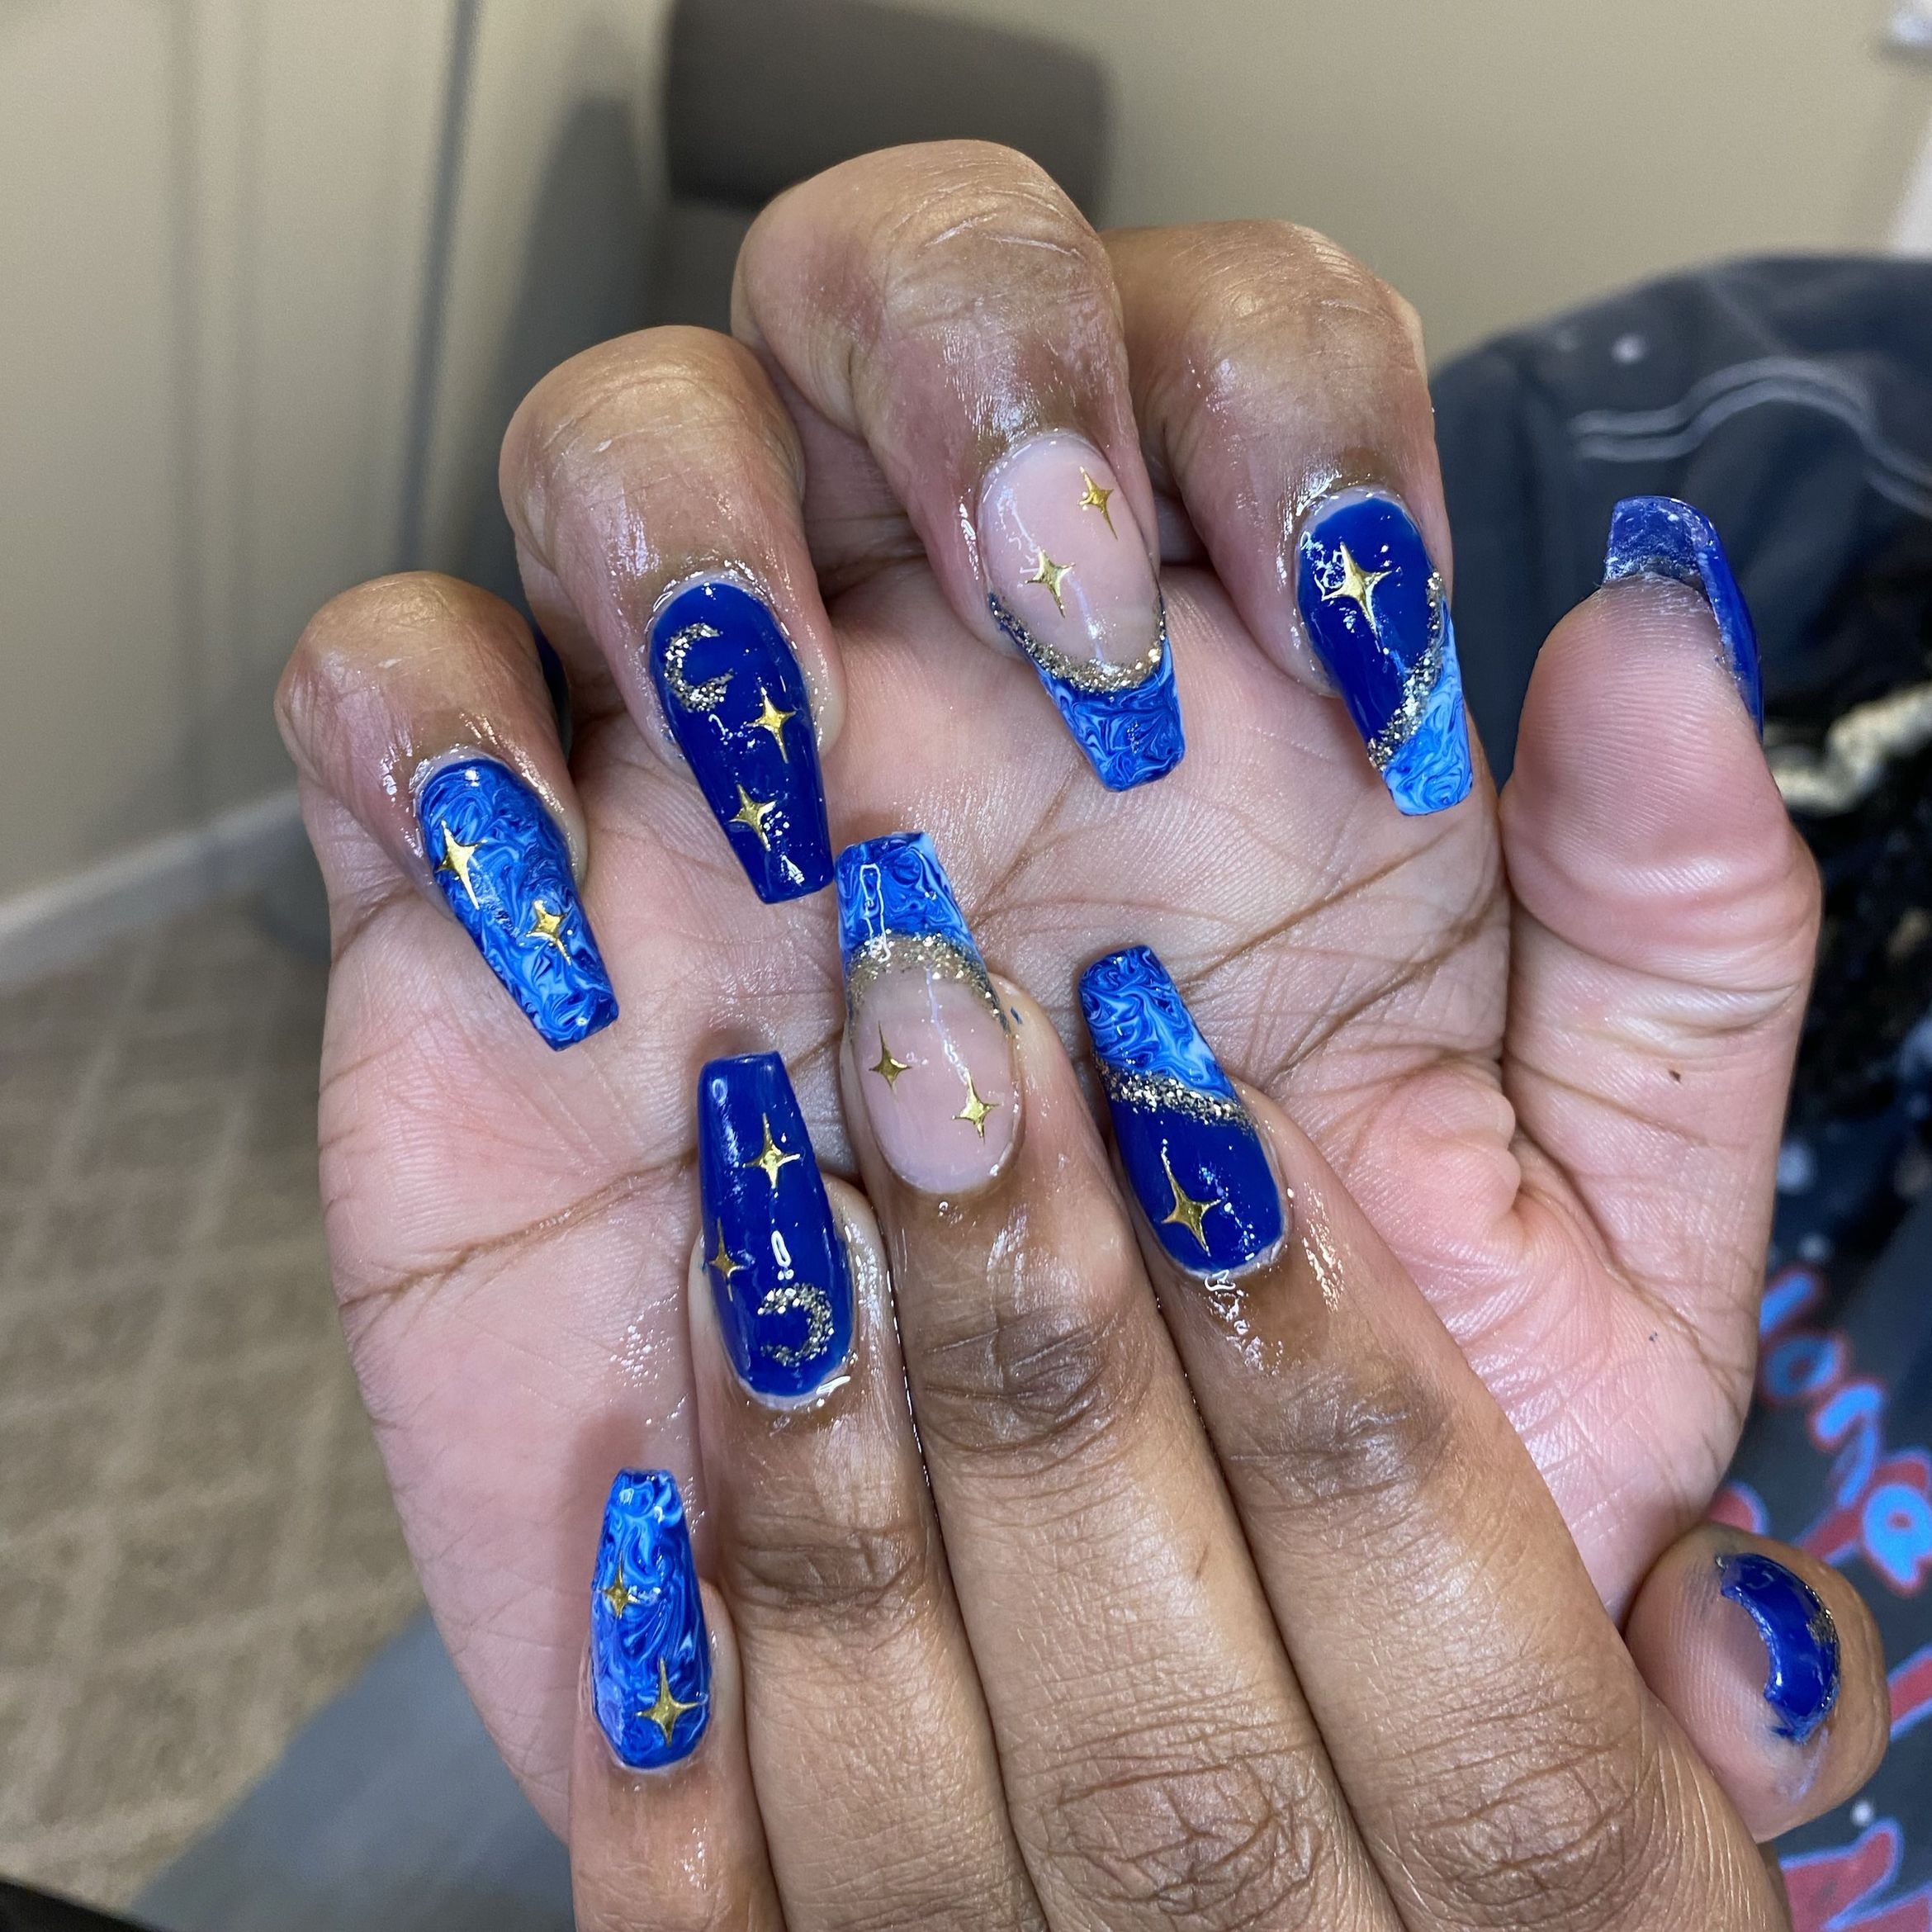 Lei’s Nails, I will text/email address after booking!, Roanoke, 24019